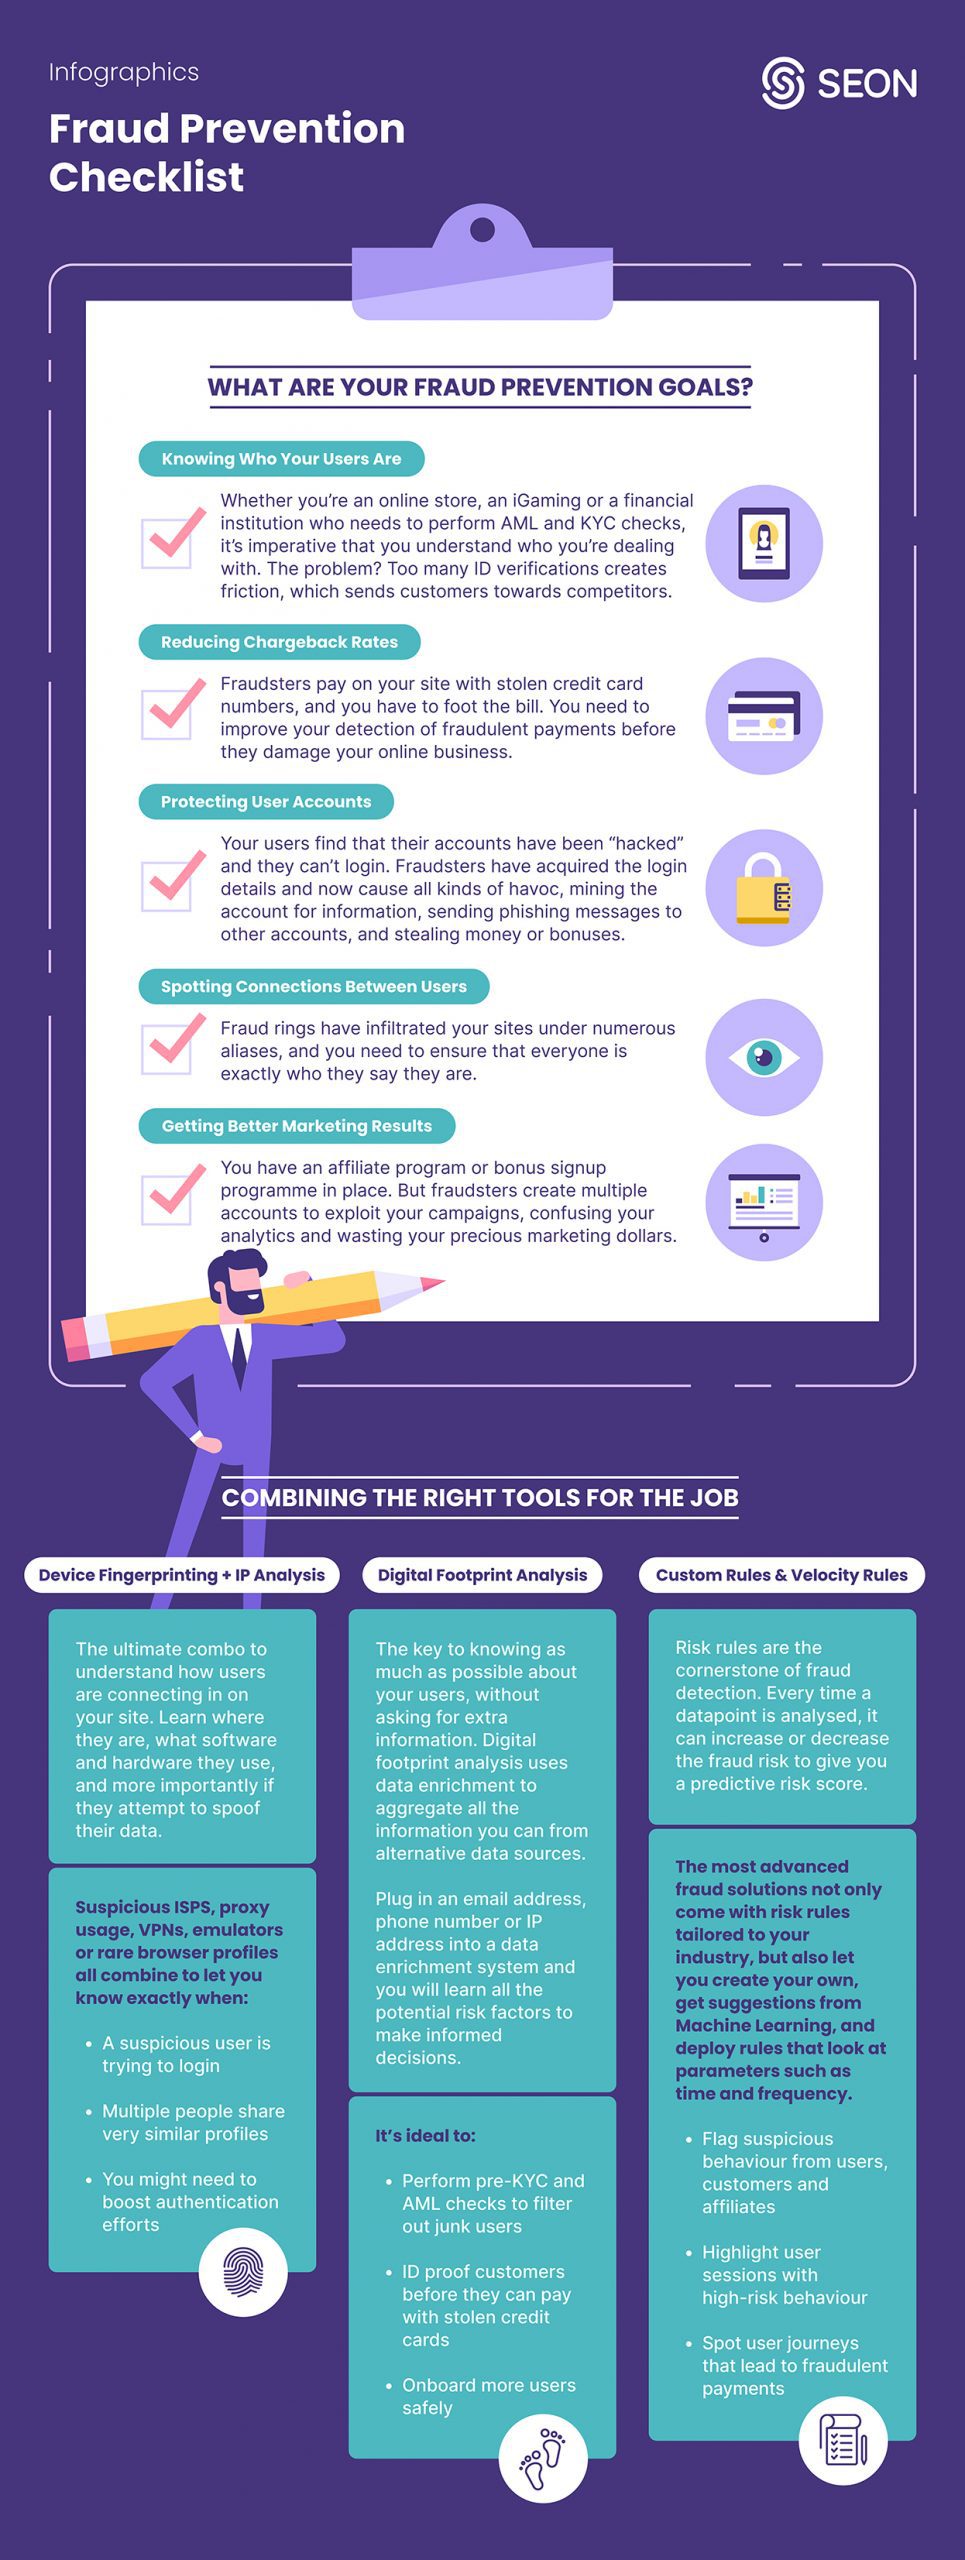 SEON's infographics for a fraud prevention checklist